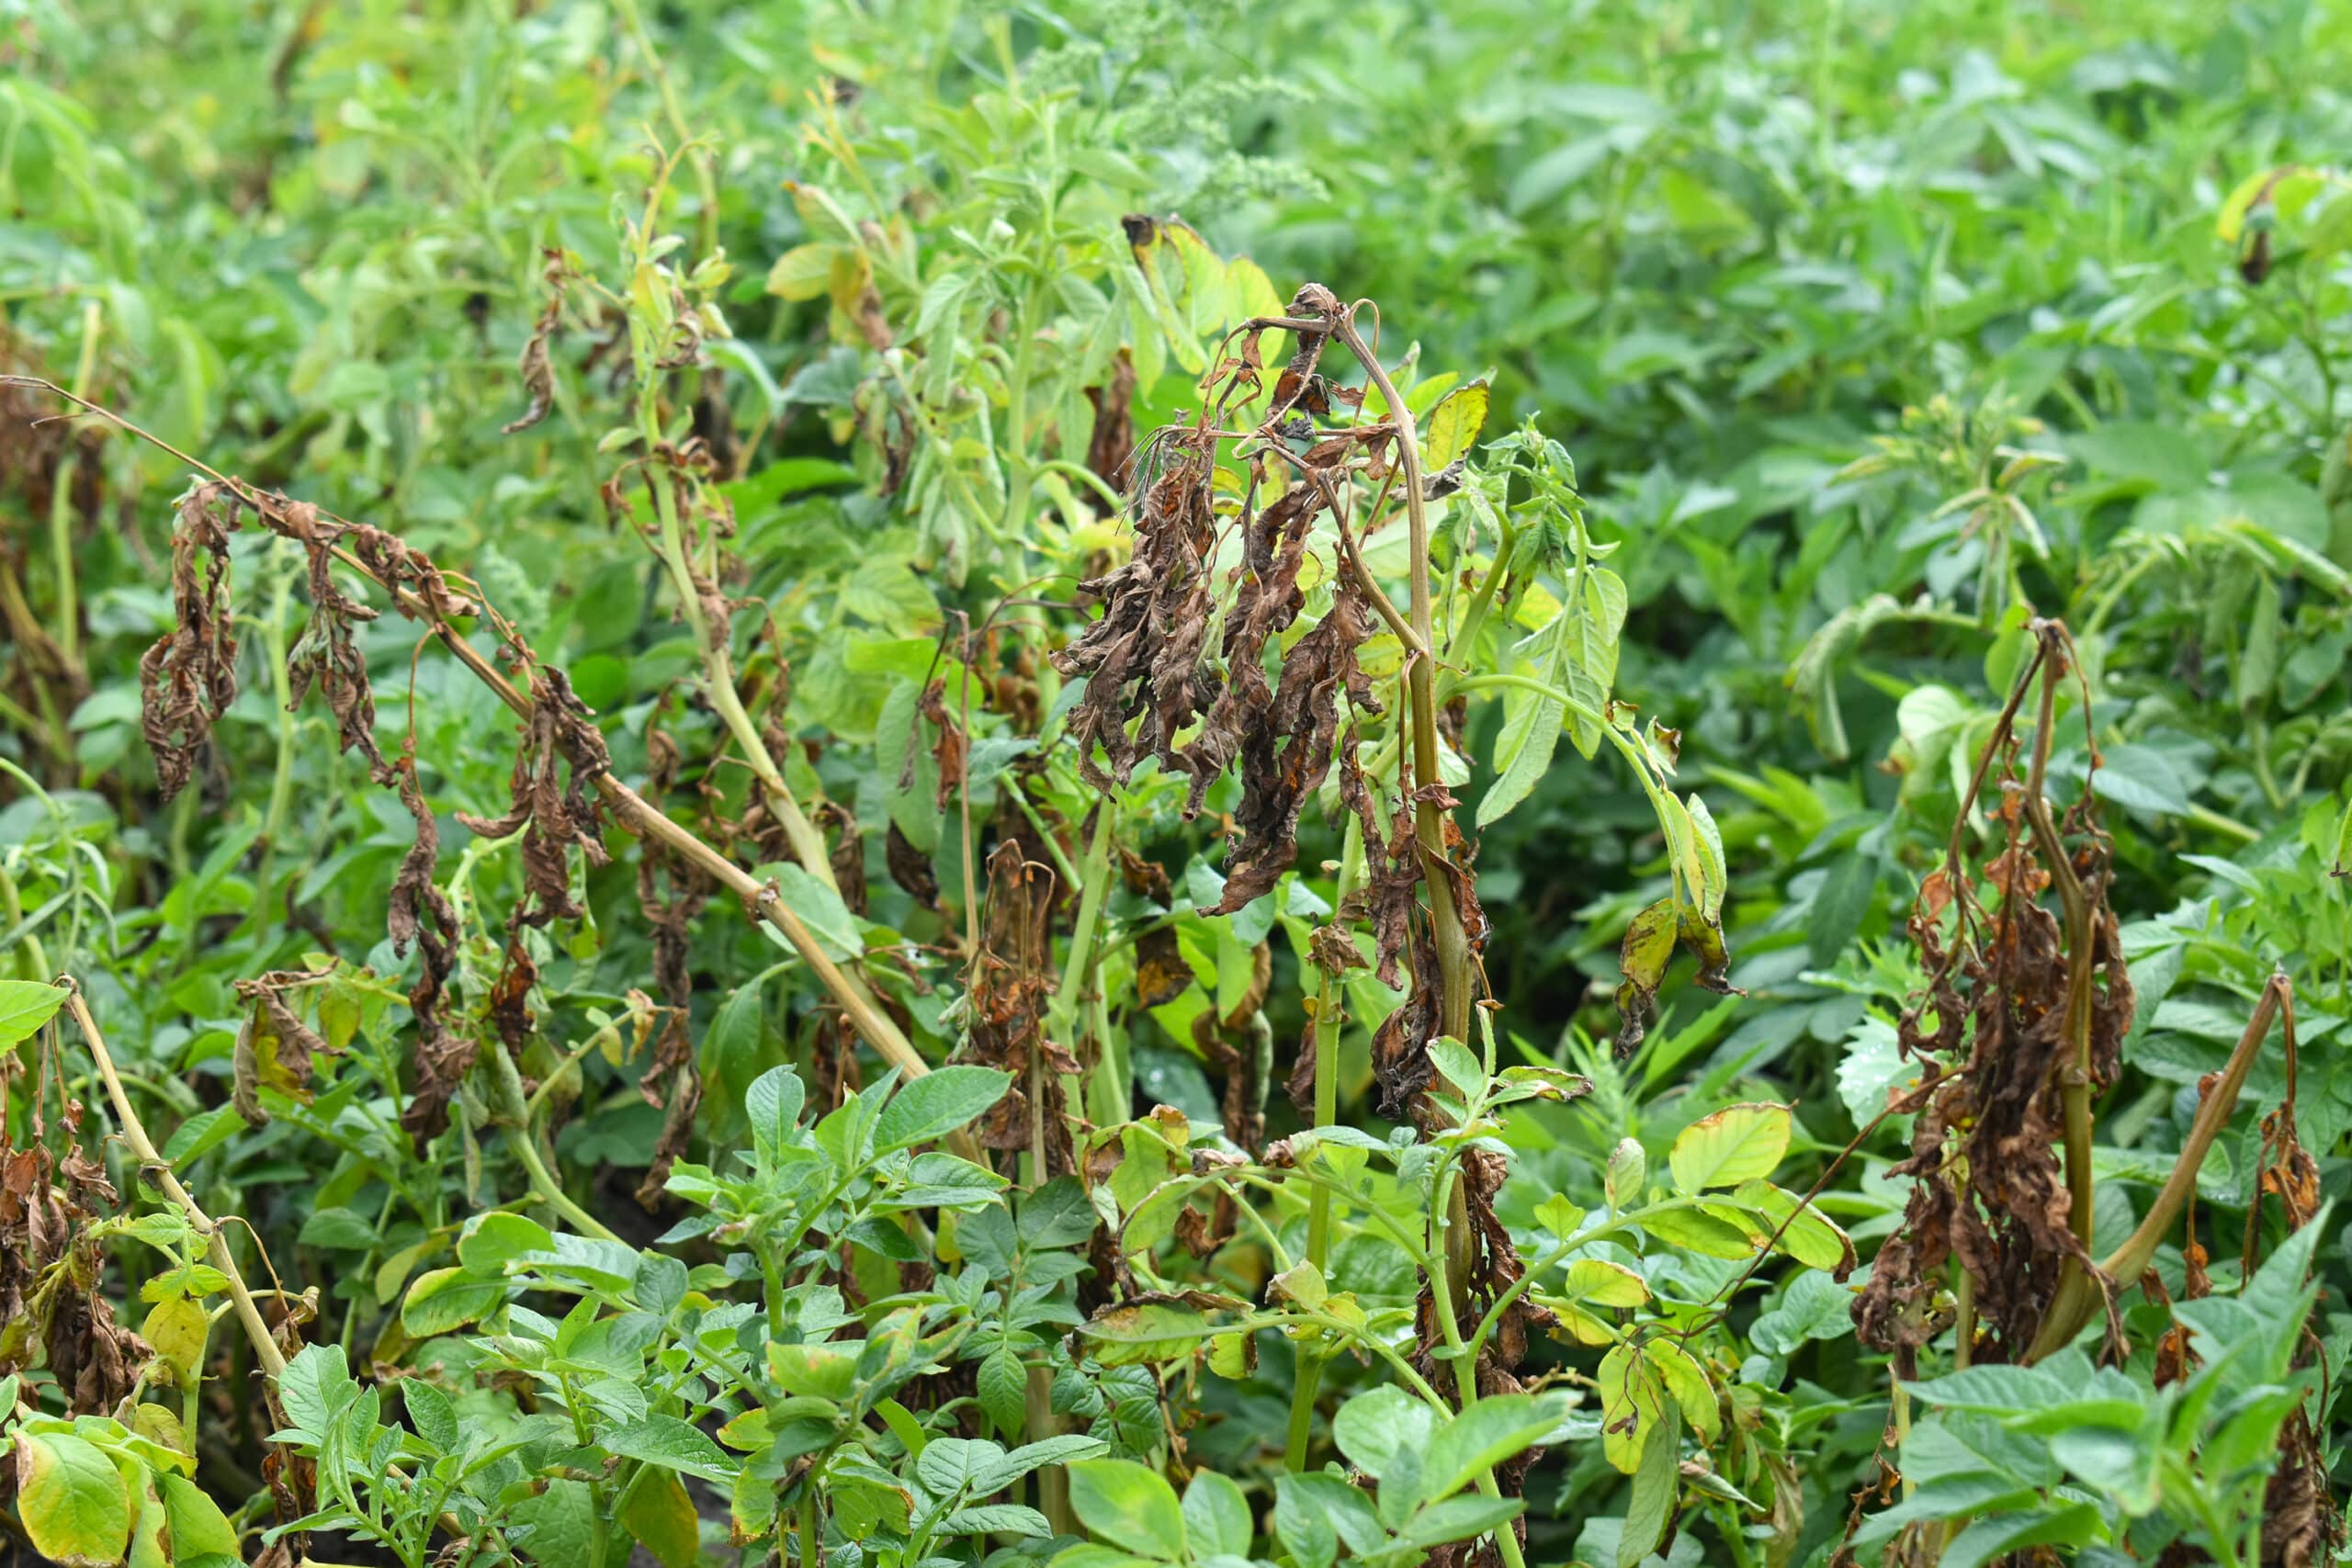 Potato plants infected with Potato Early Dying